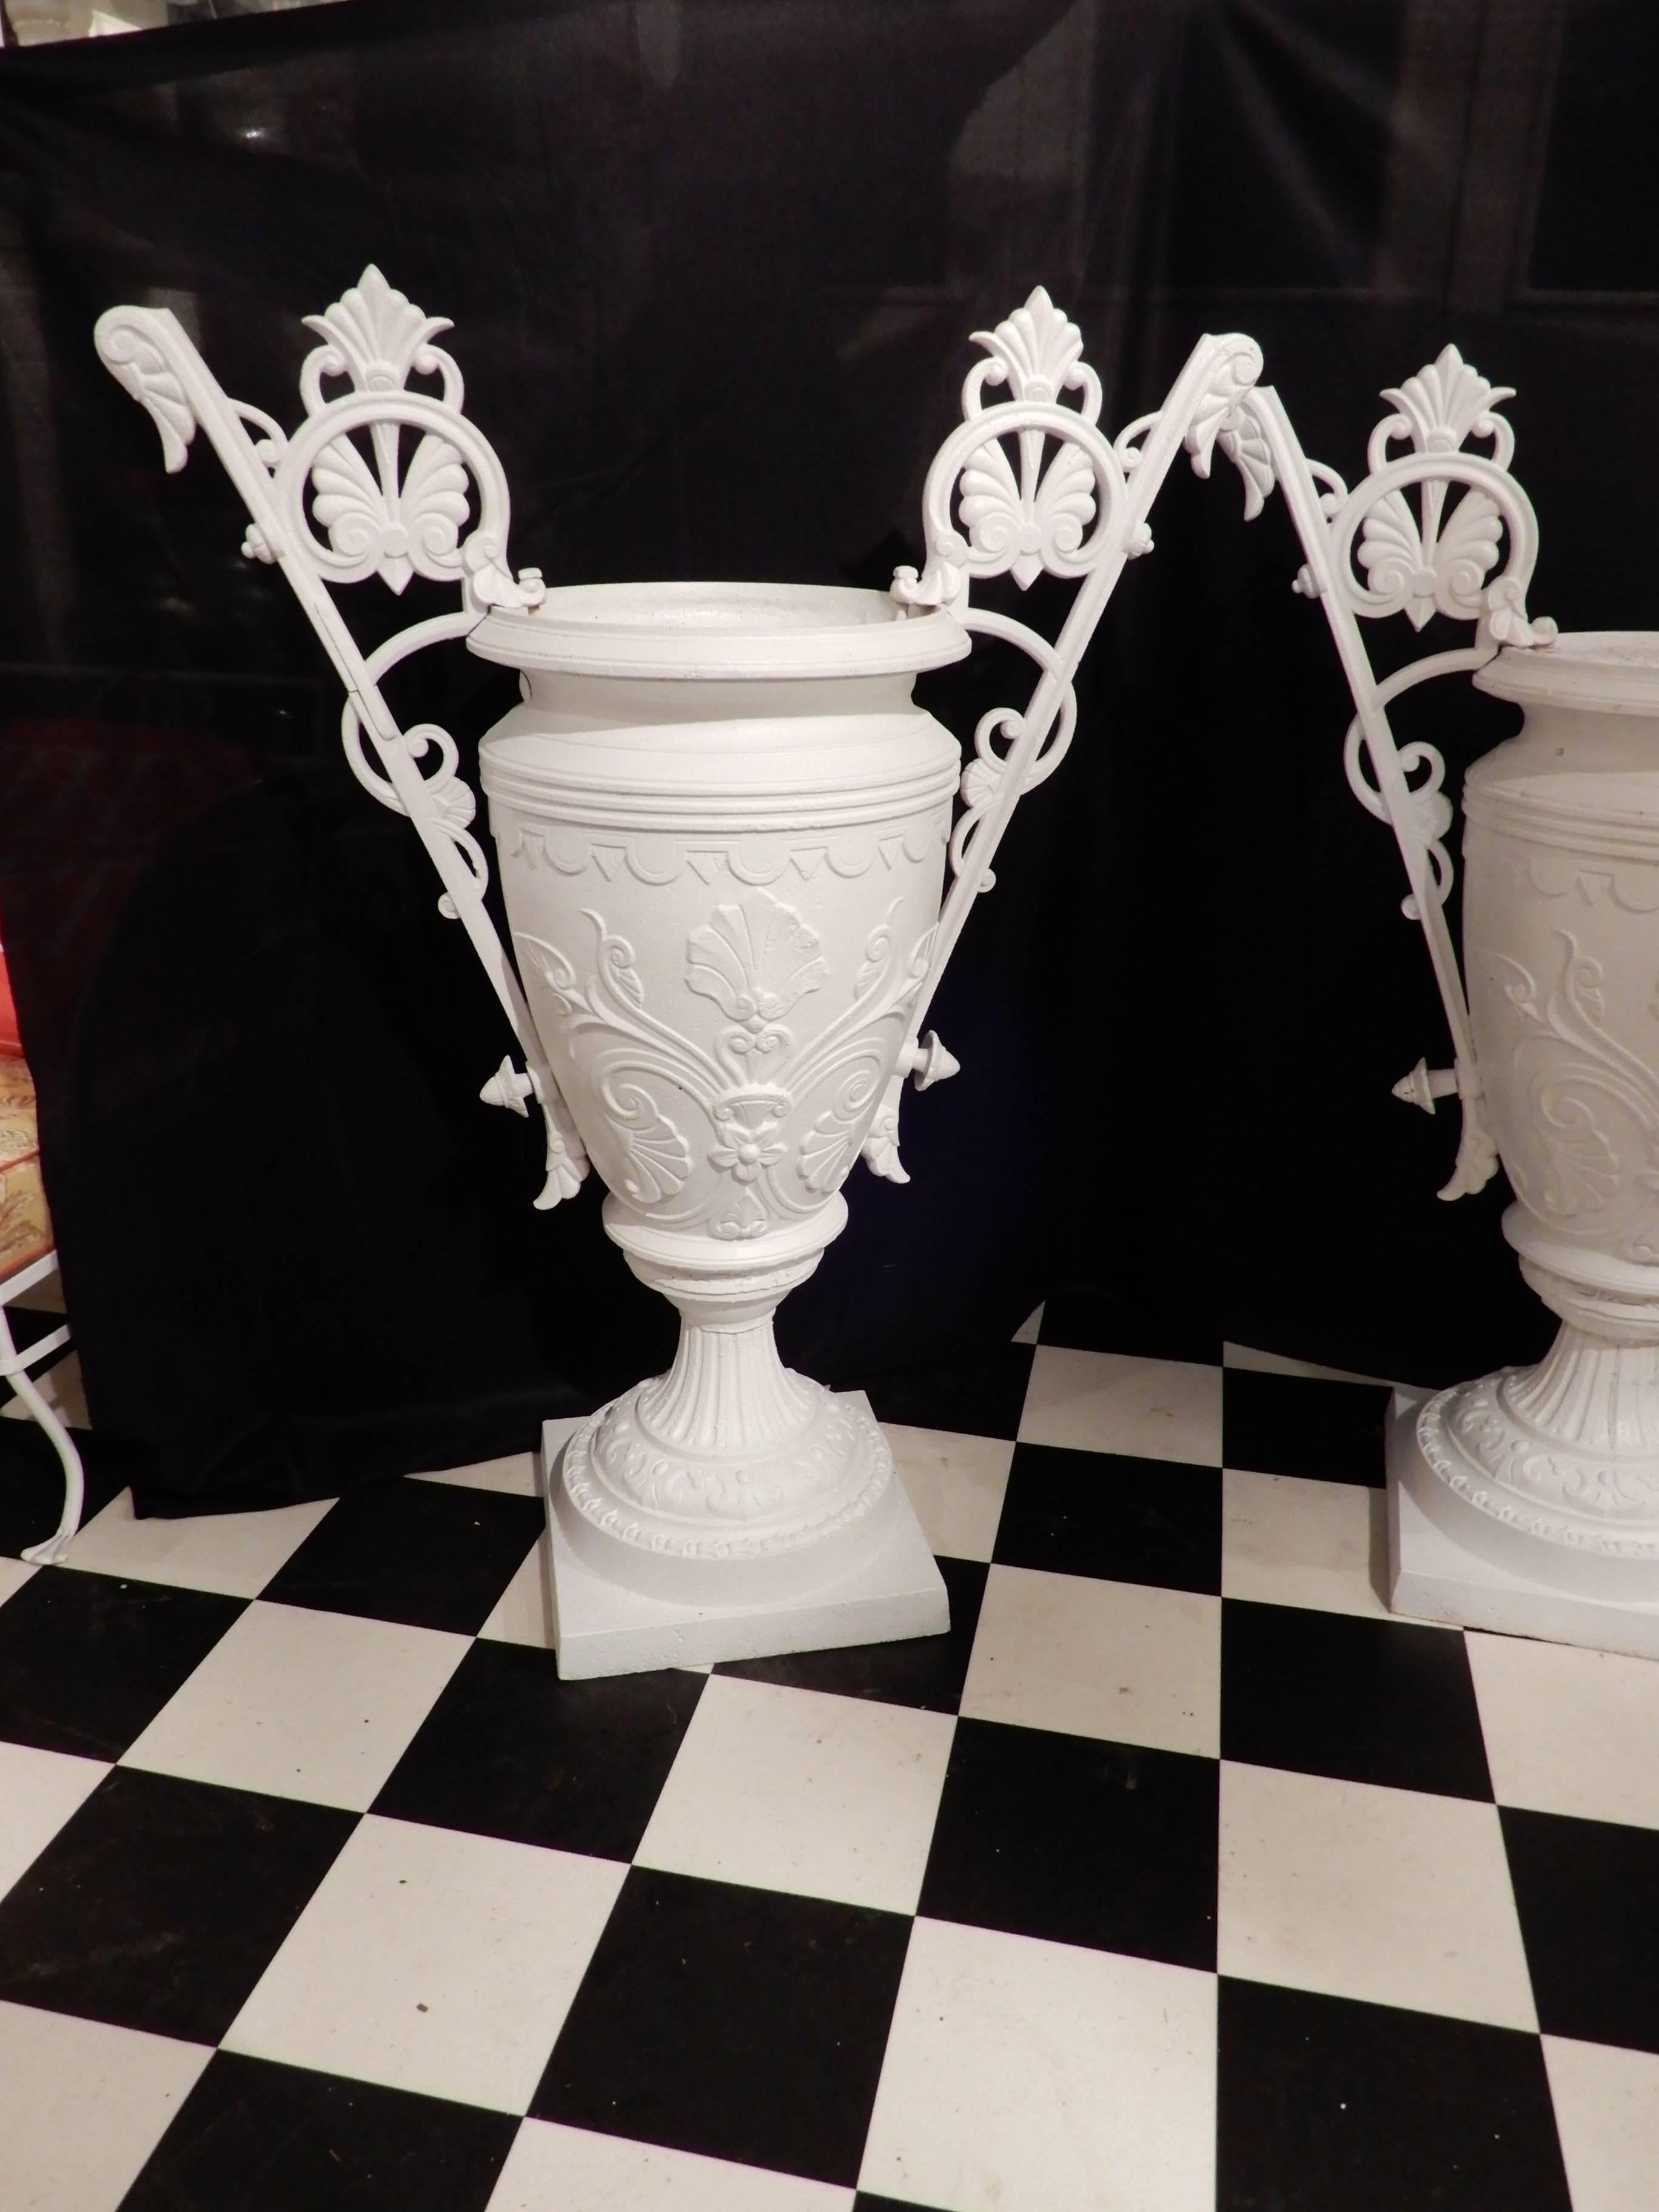 A pair of elaborate 19th century urns in the Renaissance Revival style, often referred to as the Egyptian style in the 19th Century. These urns are by the Mott Foundry of NY, who was the chief competitor of Fiske. Several years ago another urn with